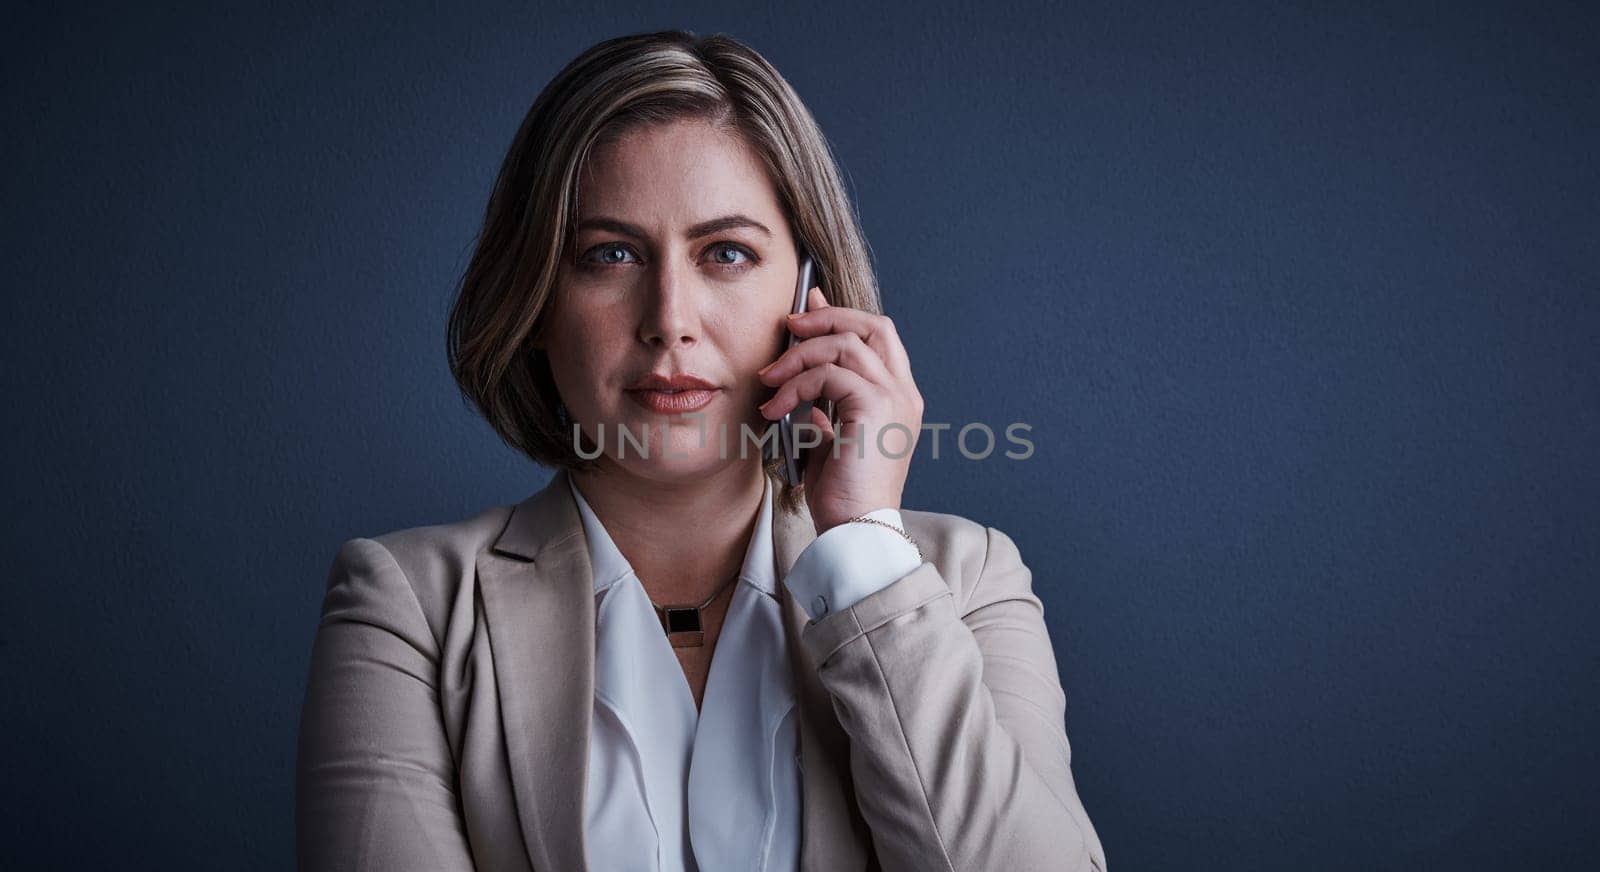 Im listening...Studio portrait of an attractive young corporate businesswoman making a call against a dark background. by YuriArcurs